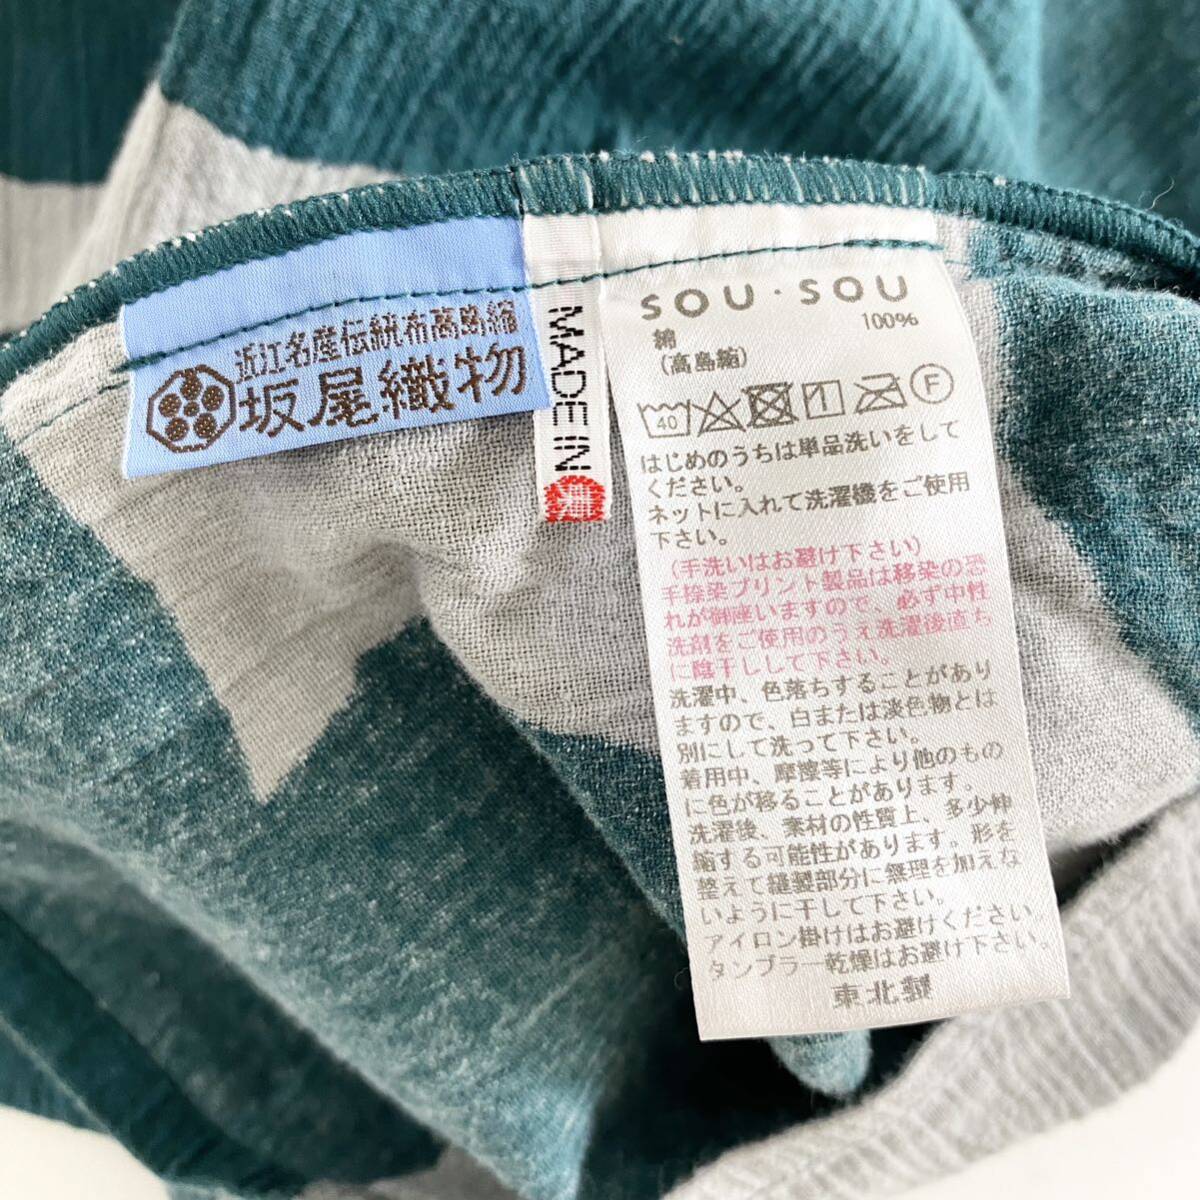 Ge13{ beautiful goods } made in Japan SOU SOU saw saw height island . slope tail woven thing total pattern short sleeves One-piece Japanese clothes One-piece free size lady's spring summer green group 